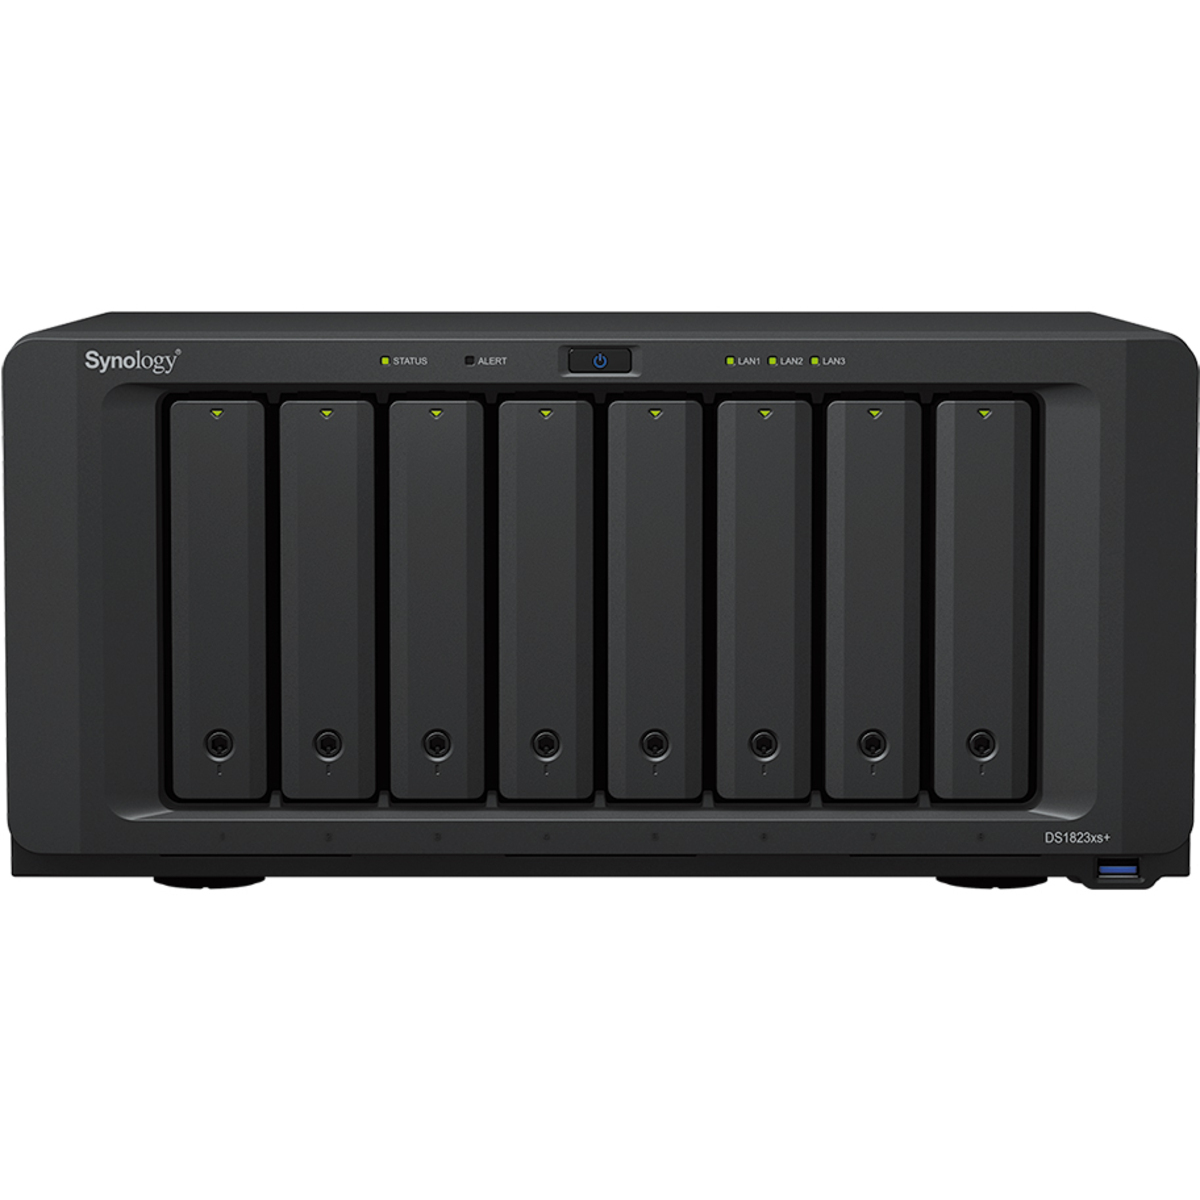 Synology DiskStation DS1823xs+ 42tb 8-Bay Desktop Multimedia / Power User / Business NAS - Network Attached Storage Device 7x6tb Western Digital Ultrastar DC HC310 HUS726T6TALE6L4 3.5 7200rpm SATA 6Gb/s HDD ENTERPRISE Class Drives Installed - Burn-In Tested DiskStation DS1823xs+